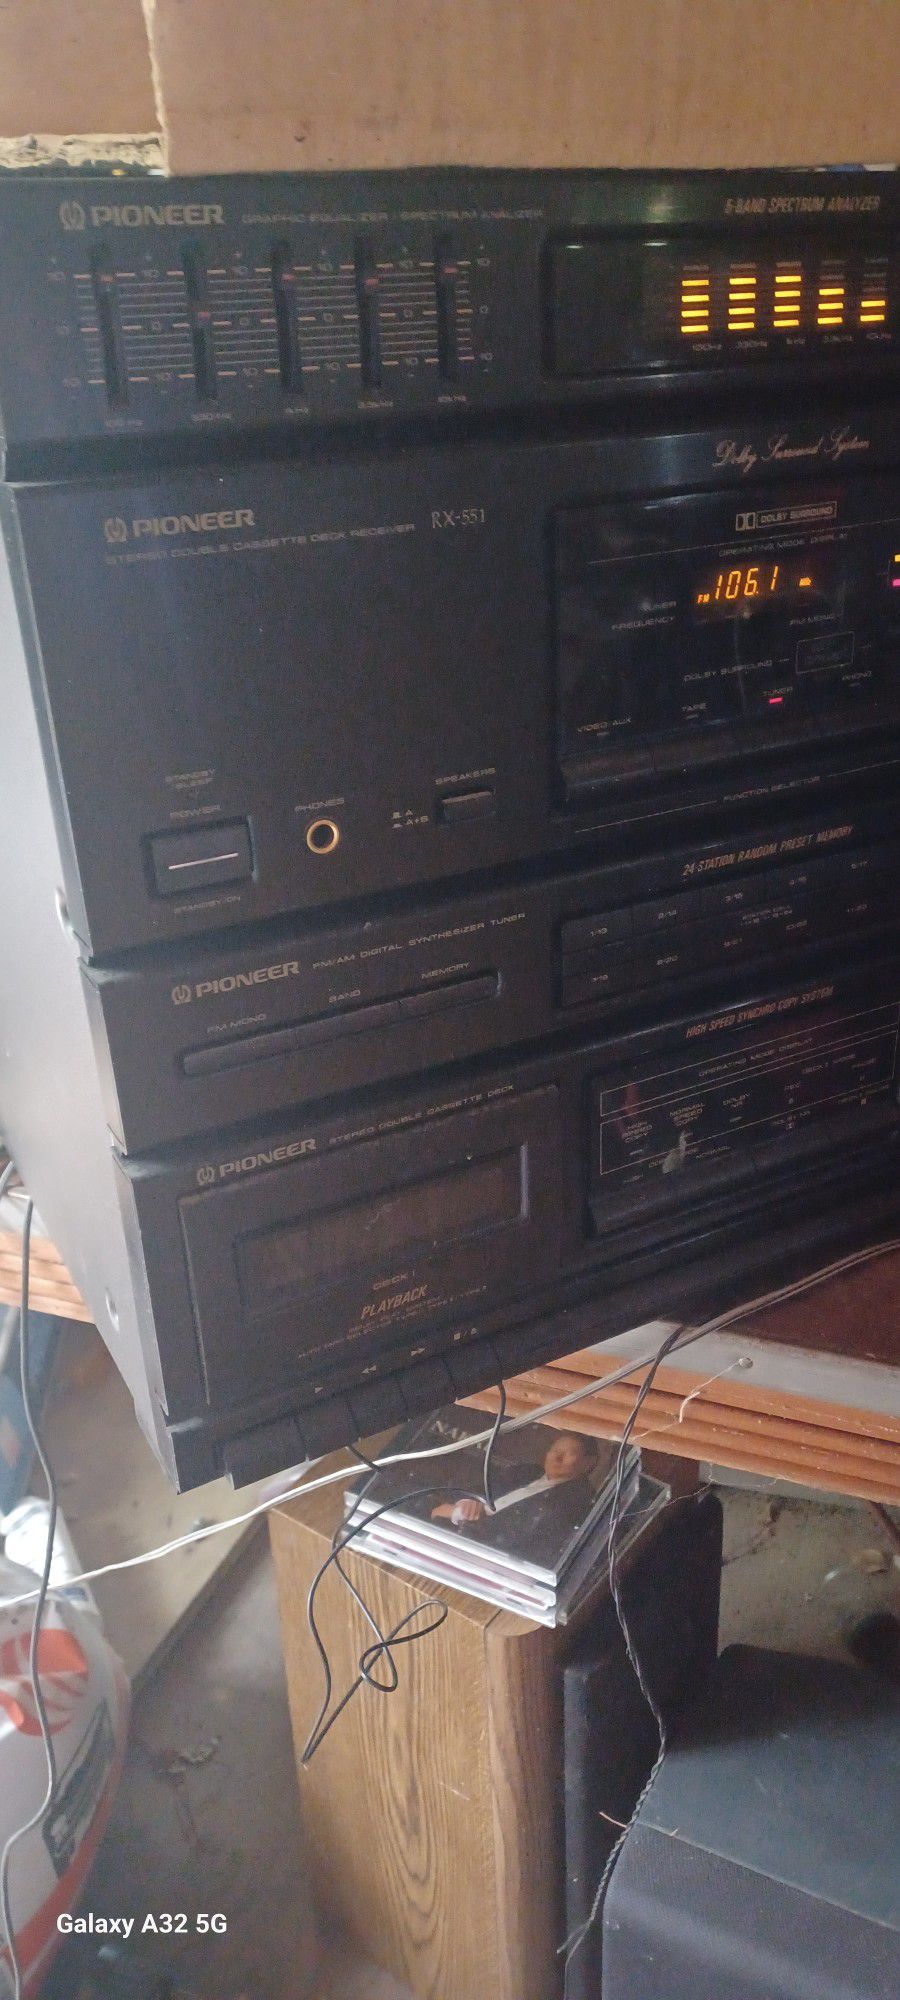 pioneer RX-551 dual cassette deck/receiver combo for sale $150will not separate $150 for the whole system Including Speakers